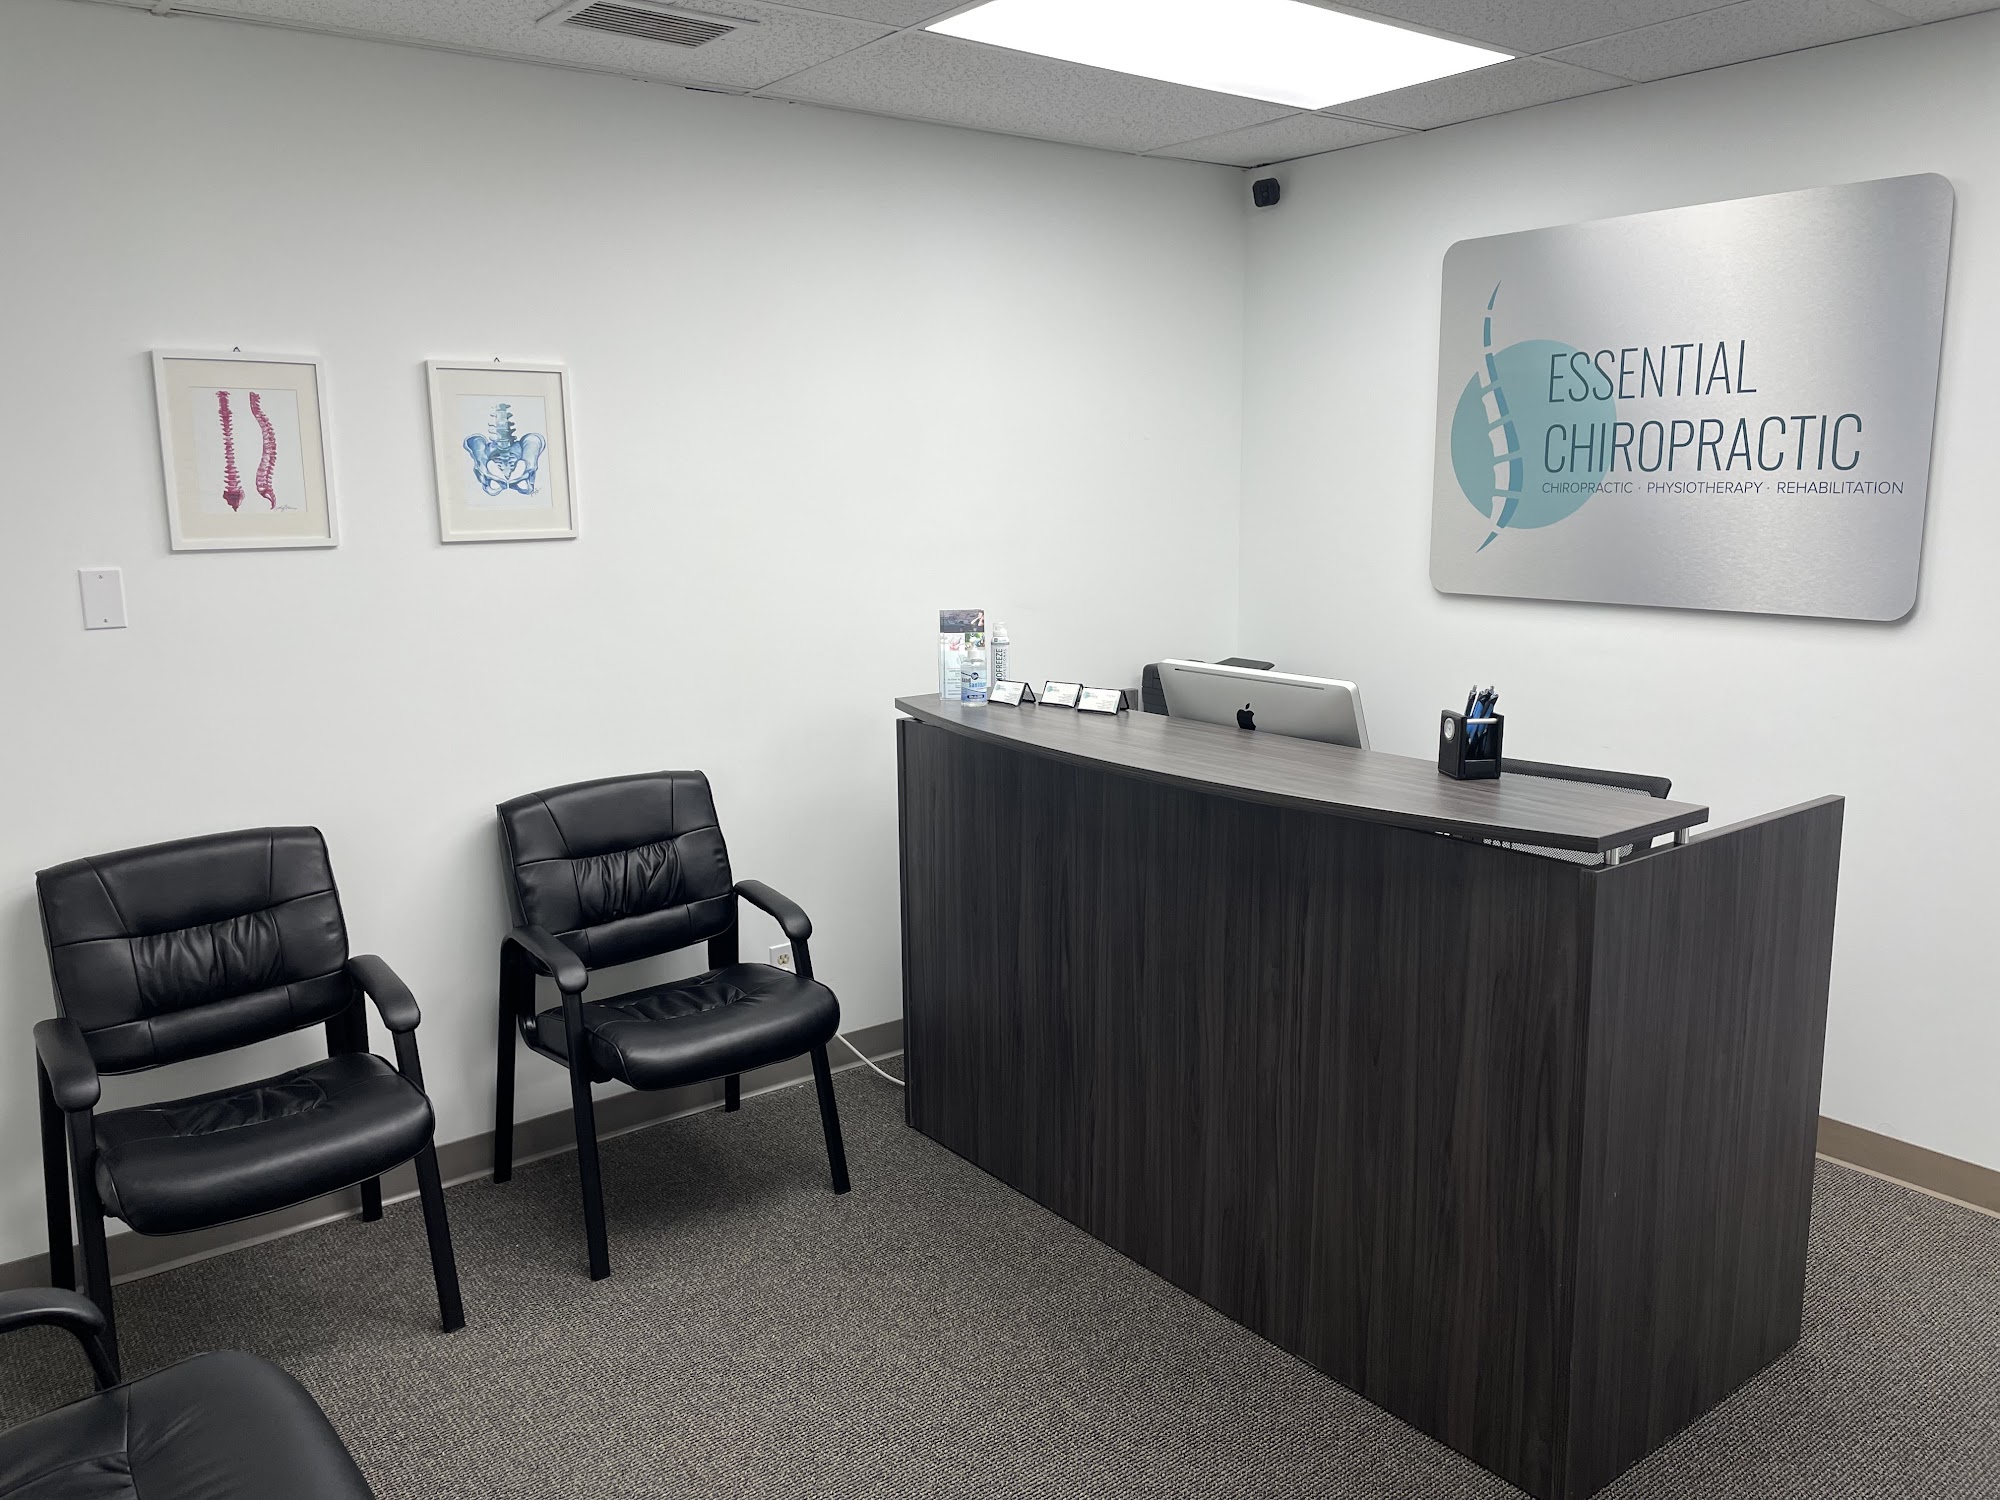 Essential Chiropractic 7610 Pennsylvania Ave. Suite 303, Forestville Maryland 20747